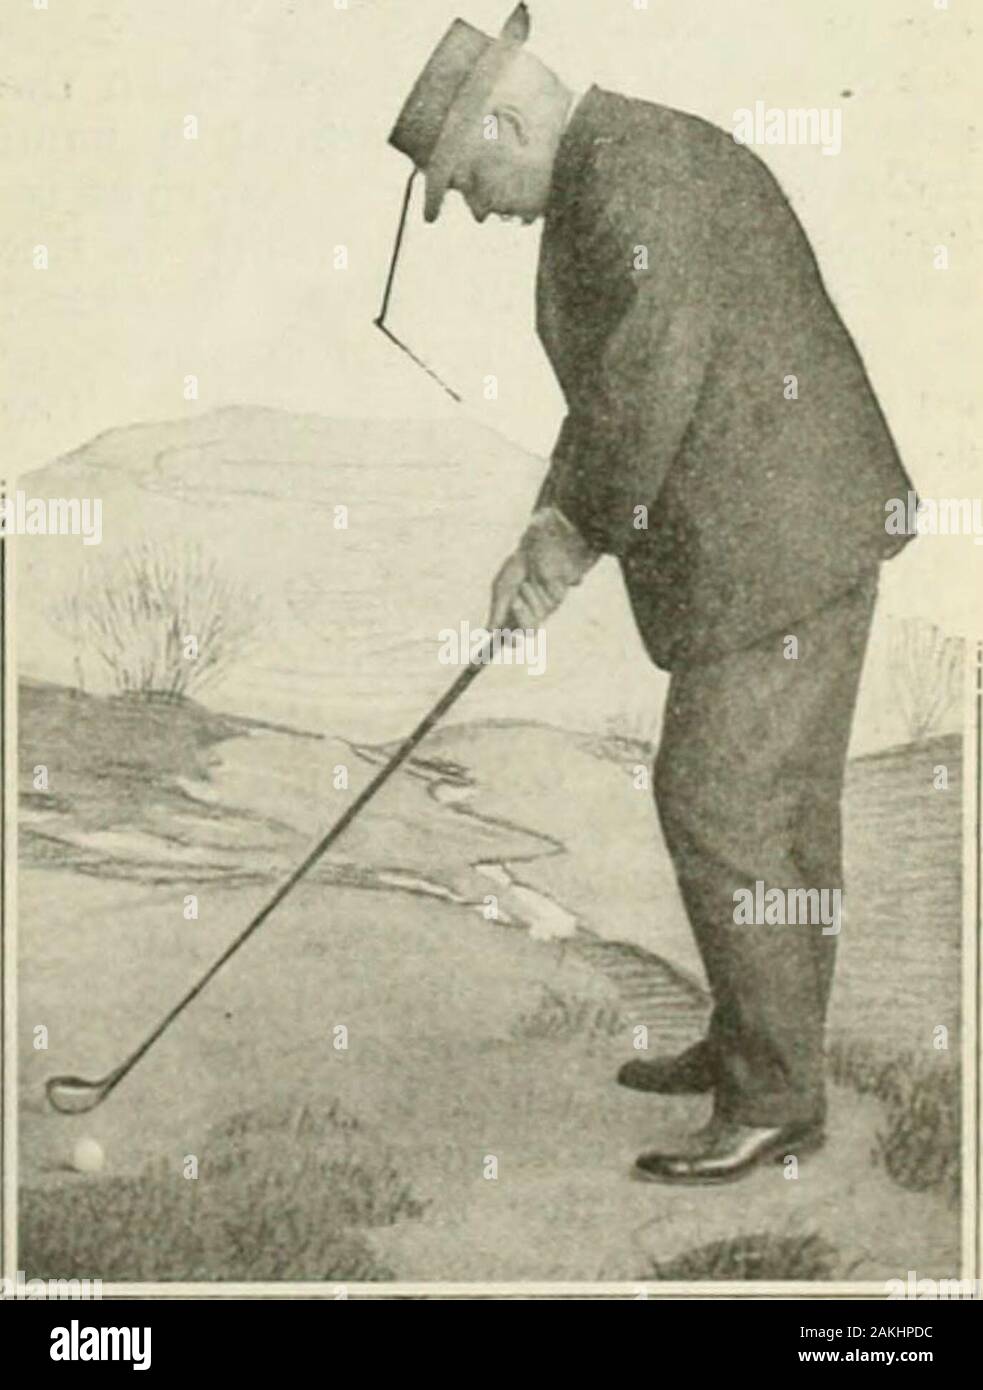 Popular science monthly . a round of the course, as wellas from all parts of the club house, fromwhida it is a few yards distant. What Golfing Sometimes Doesto the Feet ASPFXTAL jinx of the old golferhas been classified as golfersfoot. It is a condition due to brok-er fallen arches. When playing golfthe anterior portion of the foot, inright-handed players, and viceersa in left-handed players, isi)r()ught into unusual service. Asthe dric is made the weight of thebody is brought back with greatforce upon the foot that has beenelevated in the up-swing. Thegreater part of the force is caughtby t Stock Photo